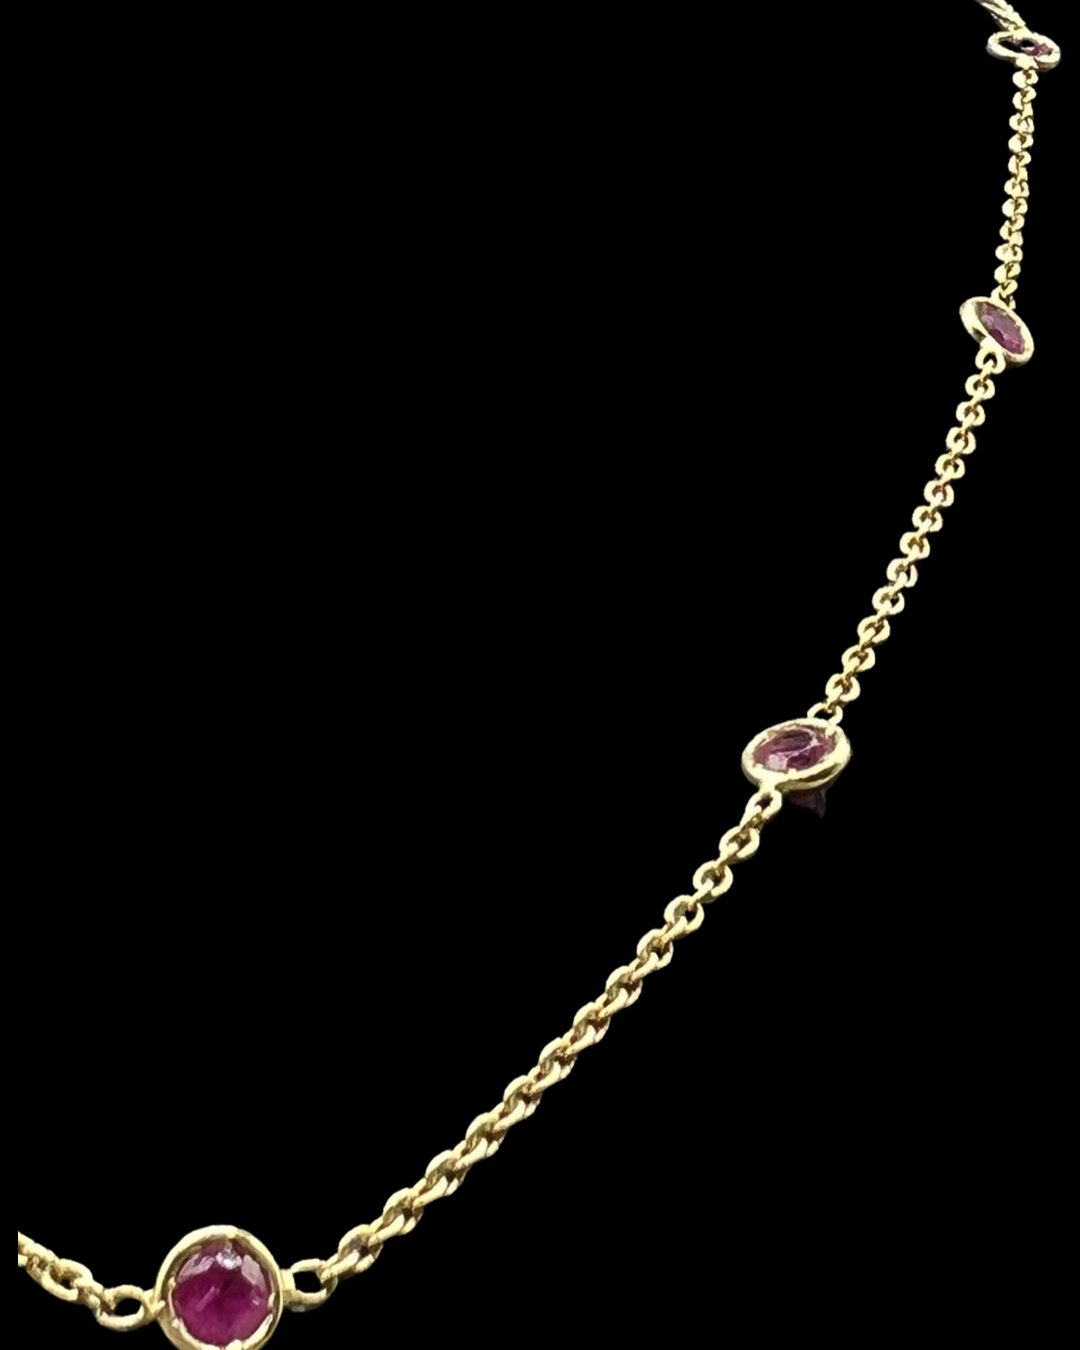 18ct Gold Rubies by The Yard Designer Style Necklace 46cm in length - Very Good Condition 4.7grams - Image 2 of 2